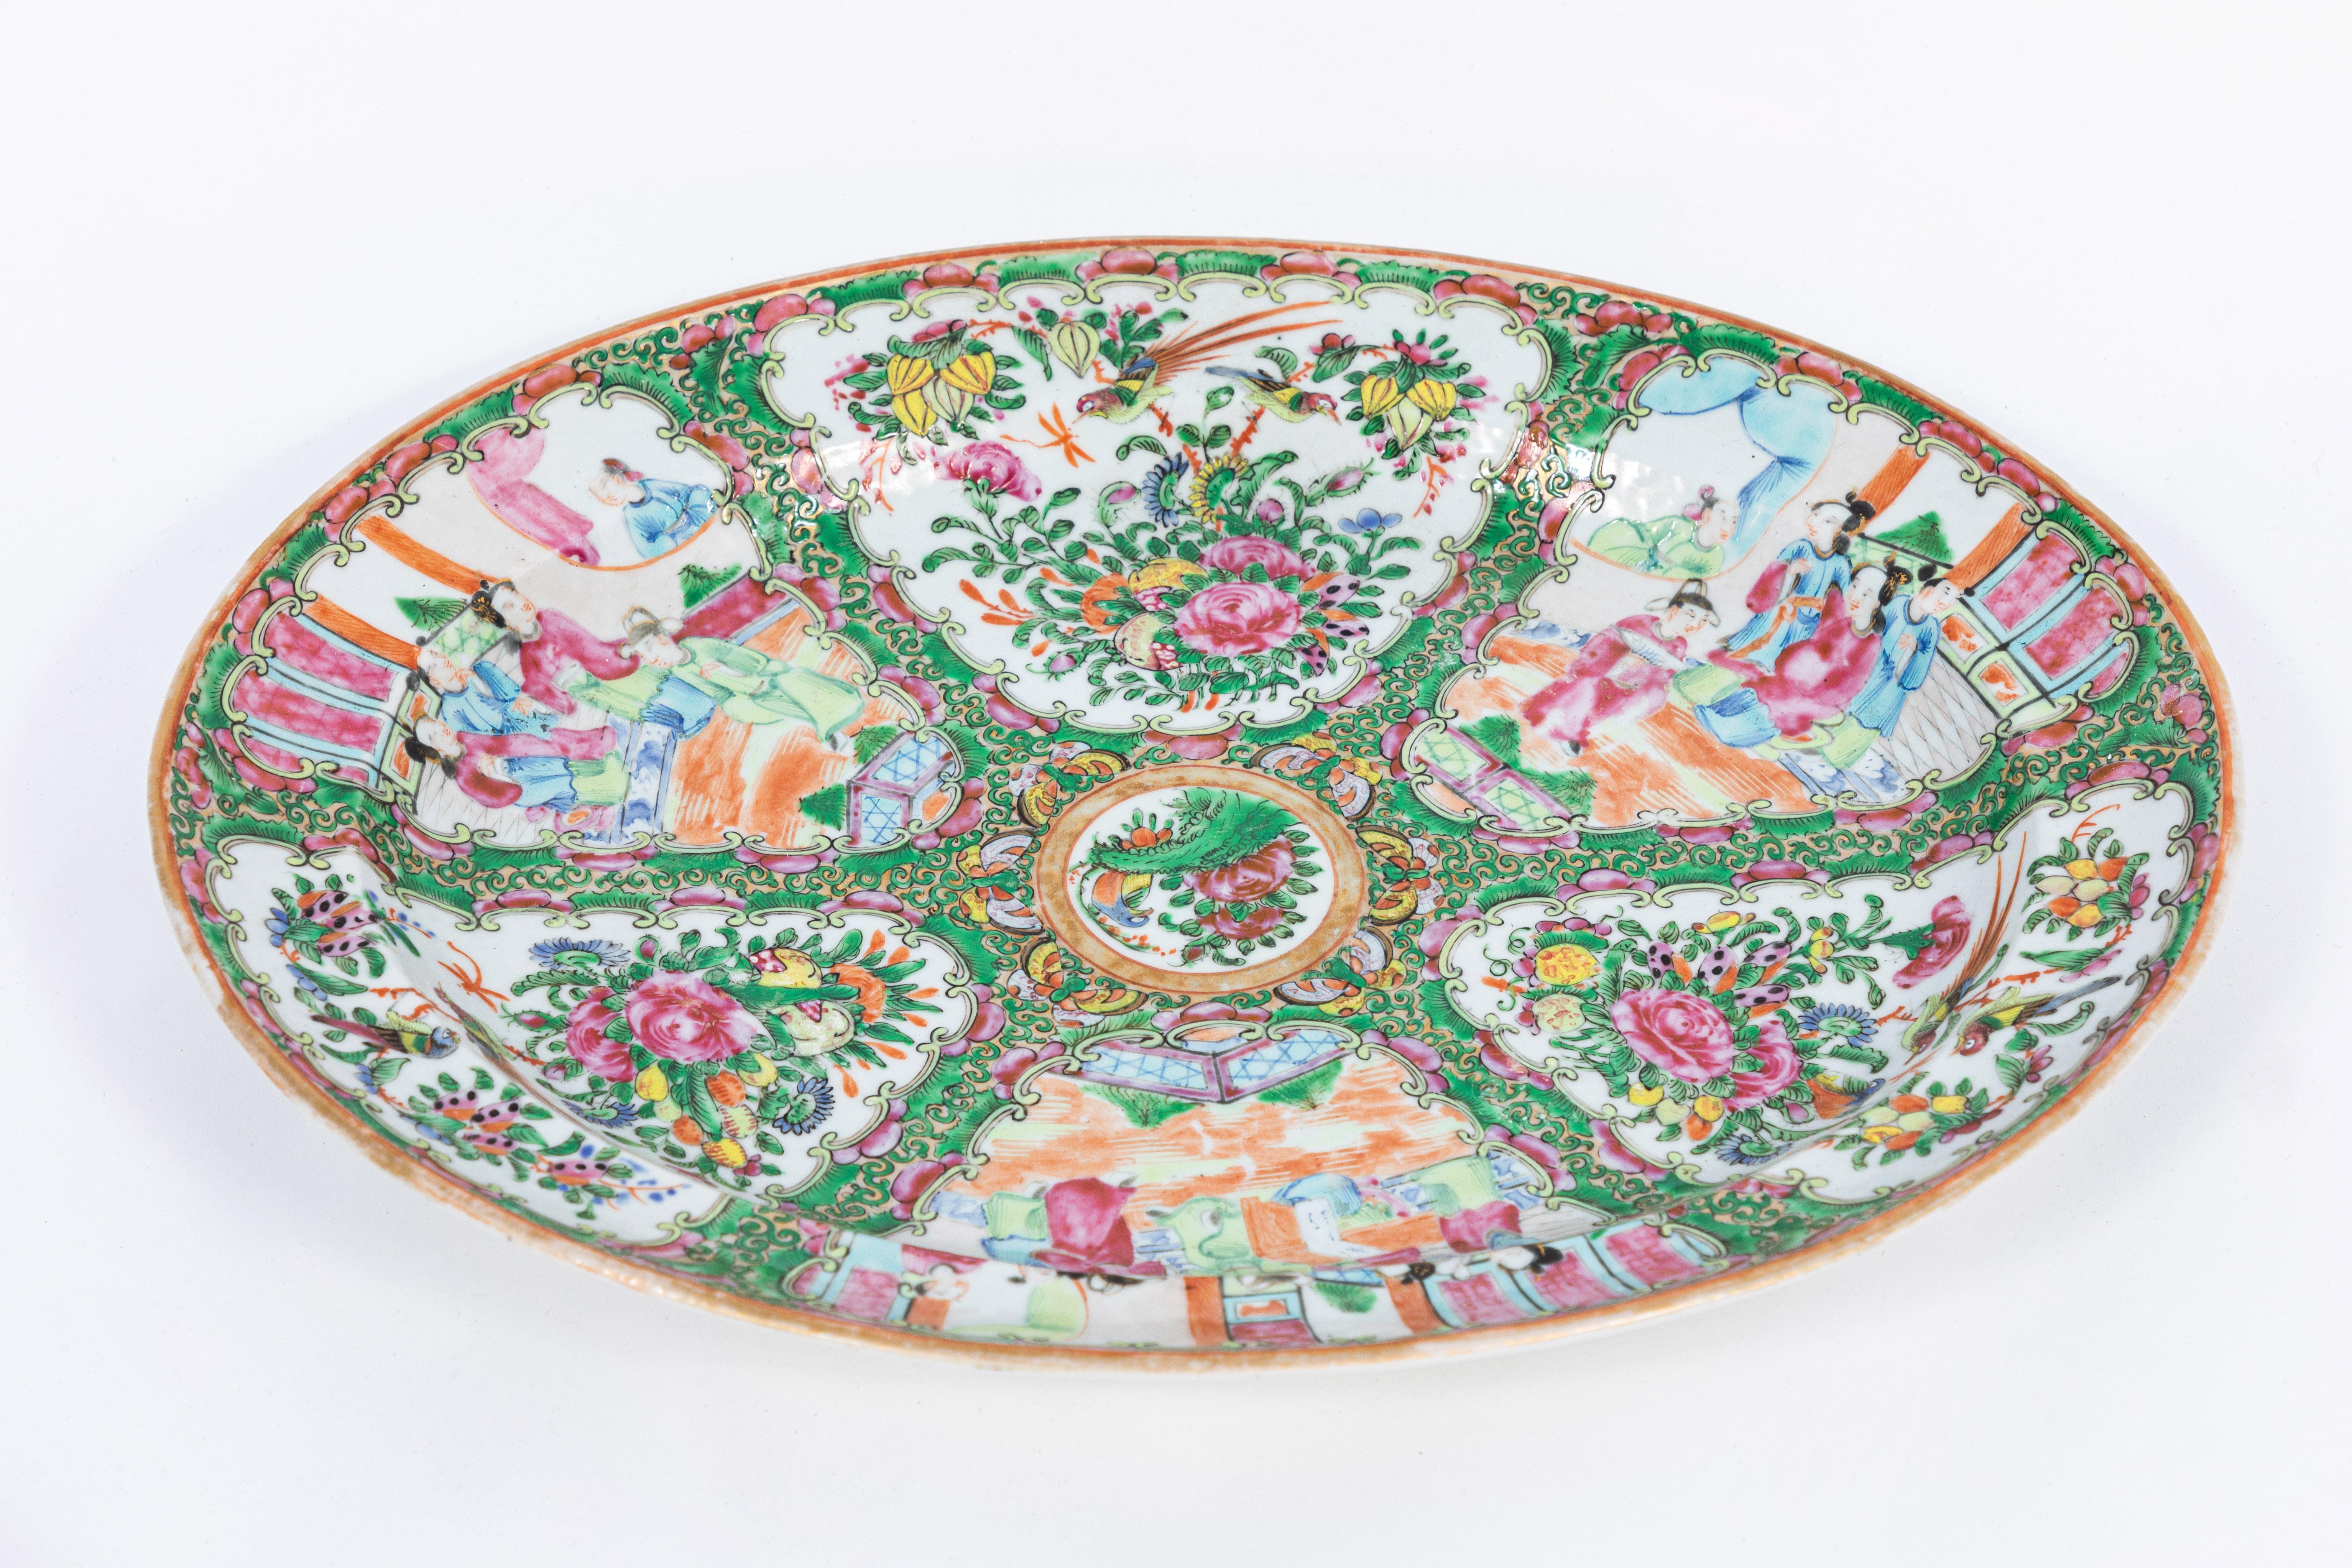 Hand-Painted 19th Century Rose Medallion Covered Tureen and Platter